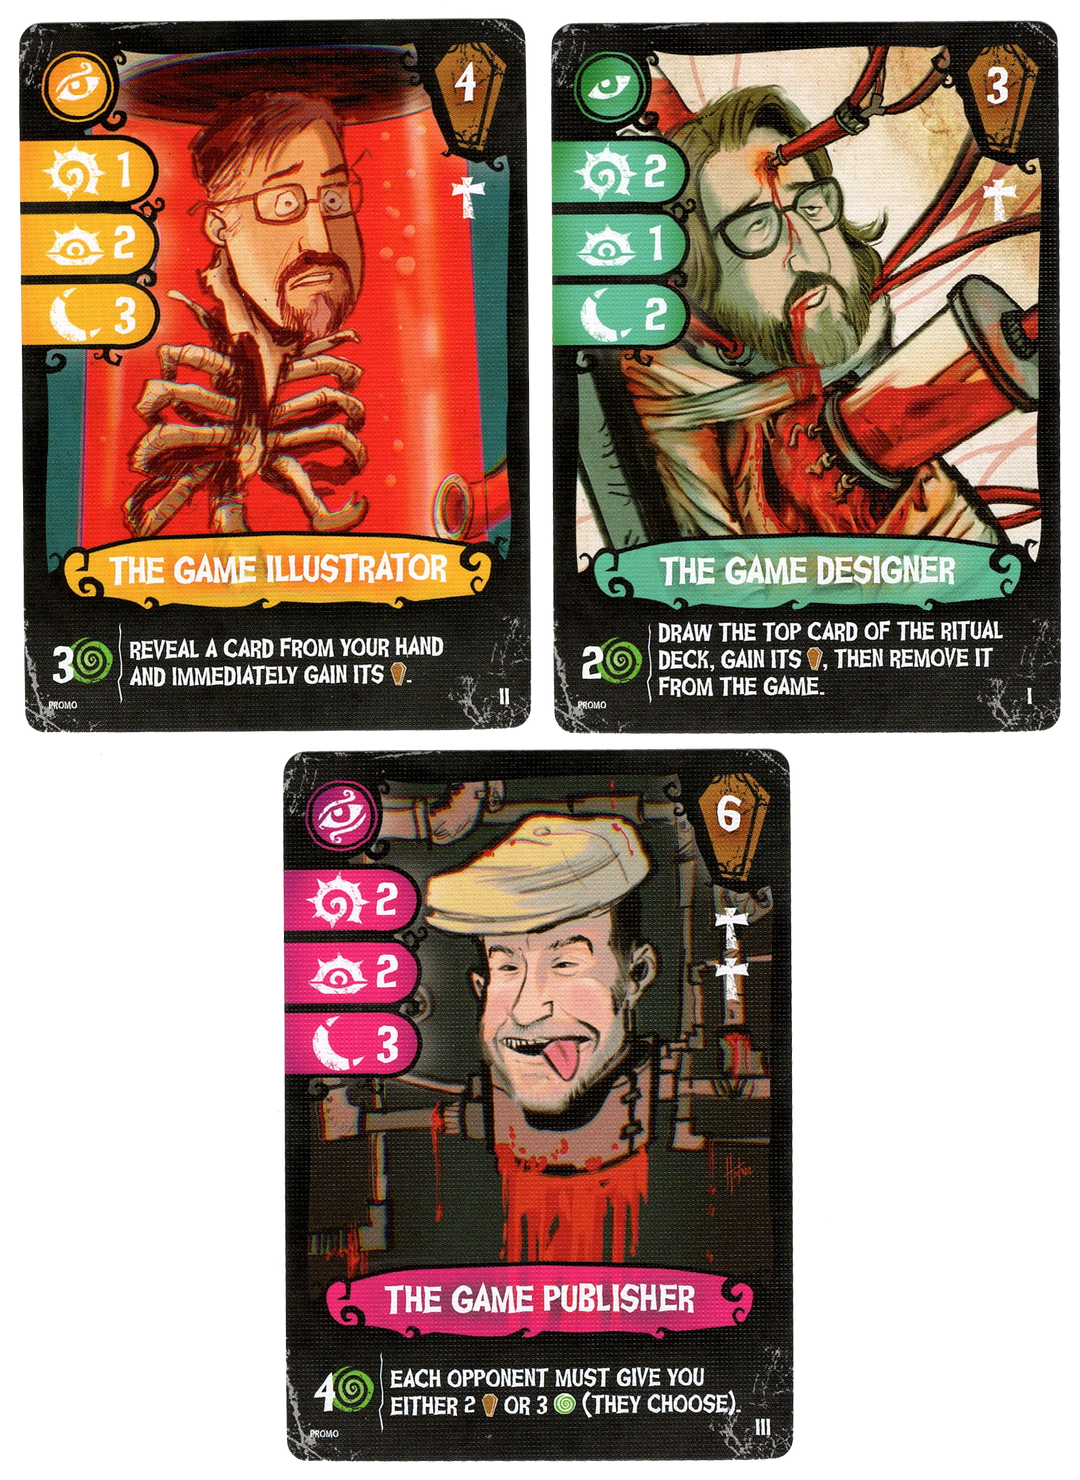 A set of three cards for use with the board game Blood Orders. Each card featuring a cartoon face in the center, the name of the card below the image, symbols along both sides, and text that describes the card's ability in the game at the bottom.